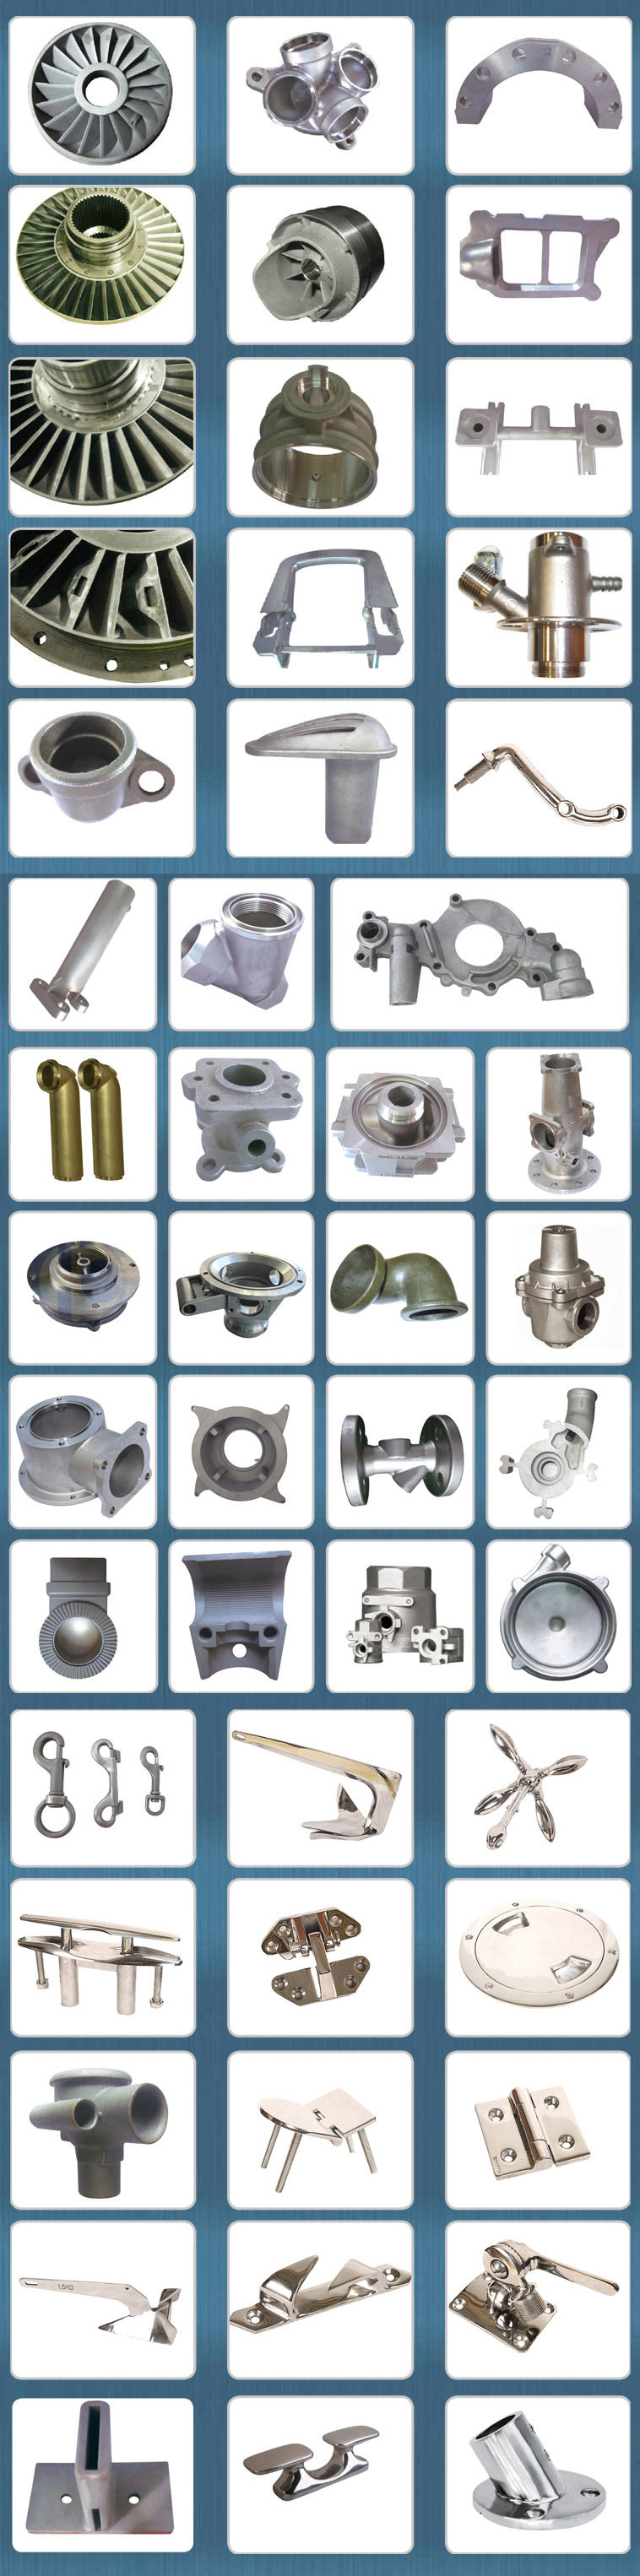 Steel Farm Machinery Parts Made by Investment Casting Method